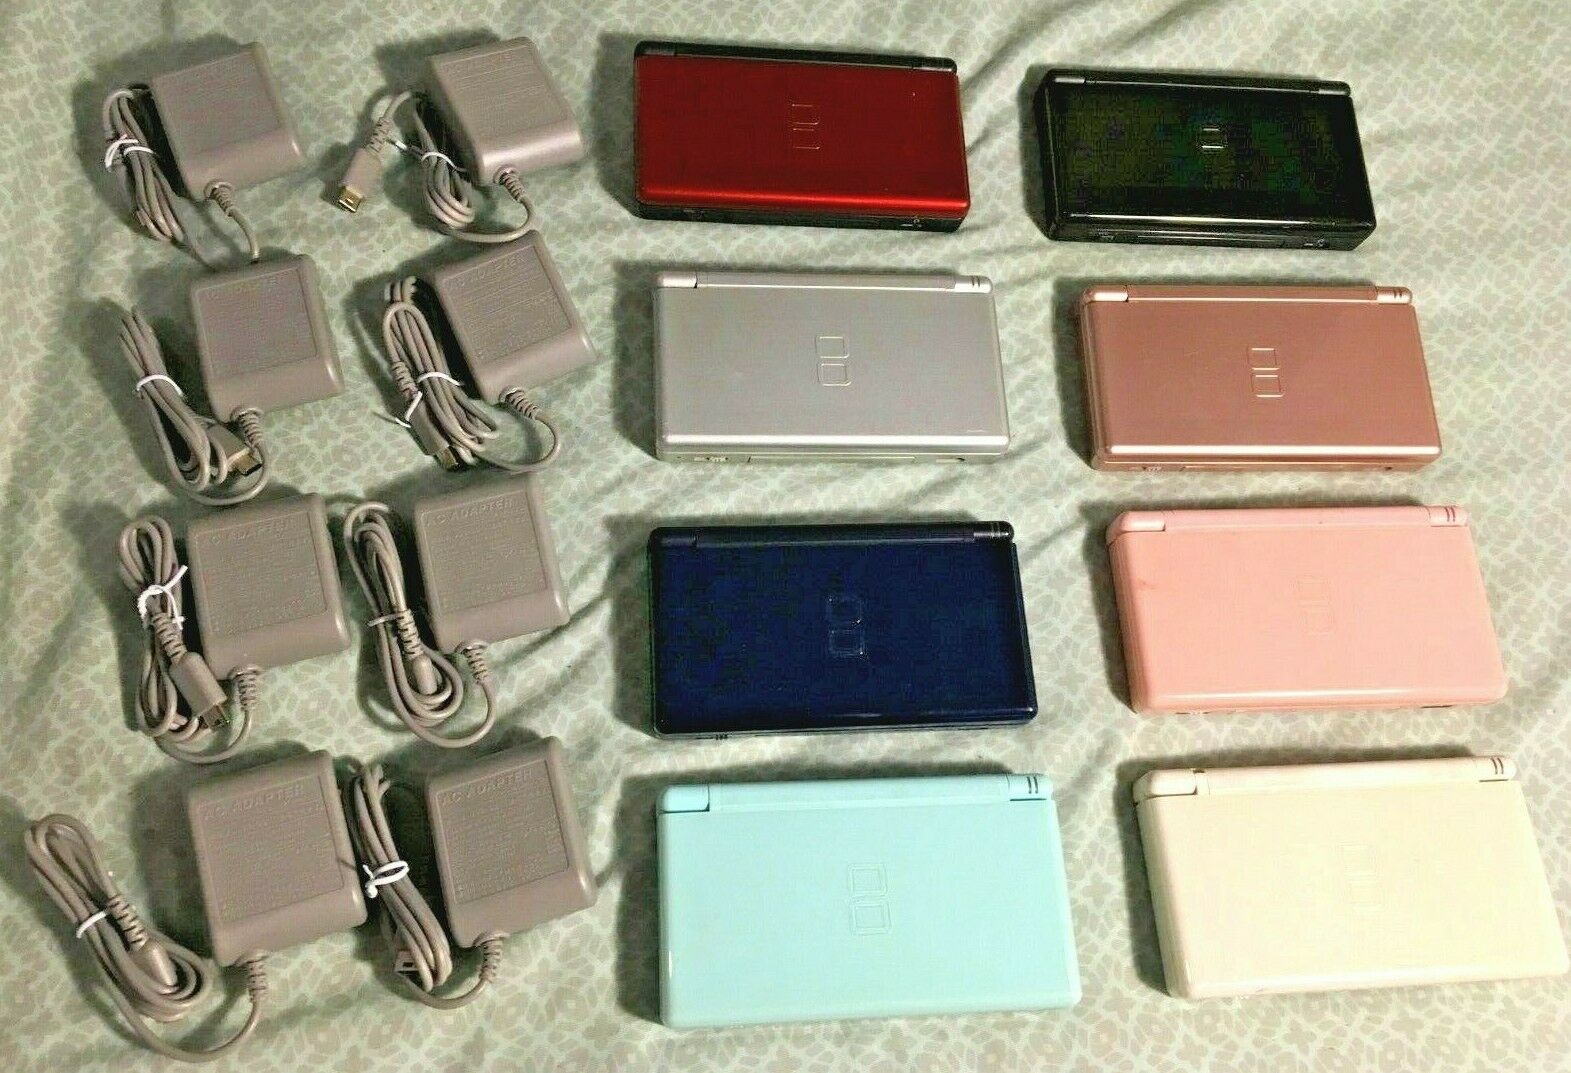 Original Nintendo Ds Lite Gameboy Gba Ds Games Charger Stylus Black Pink Teal Wh